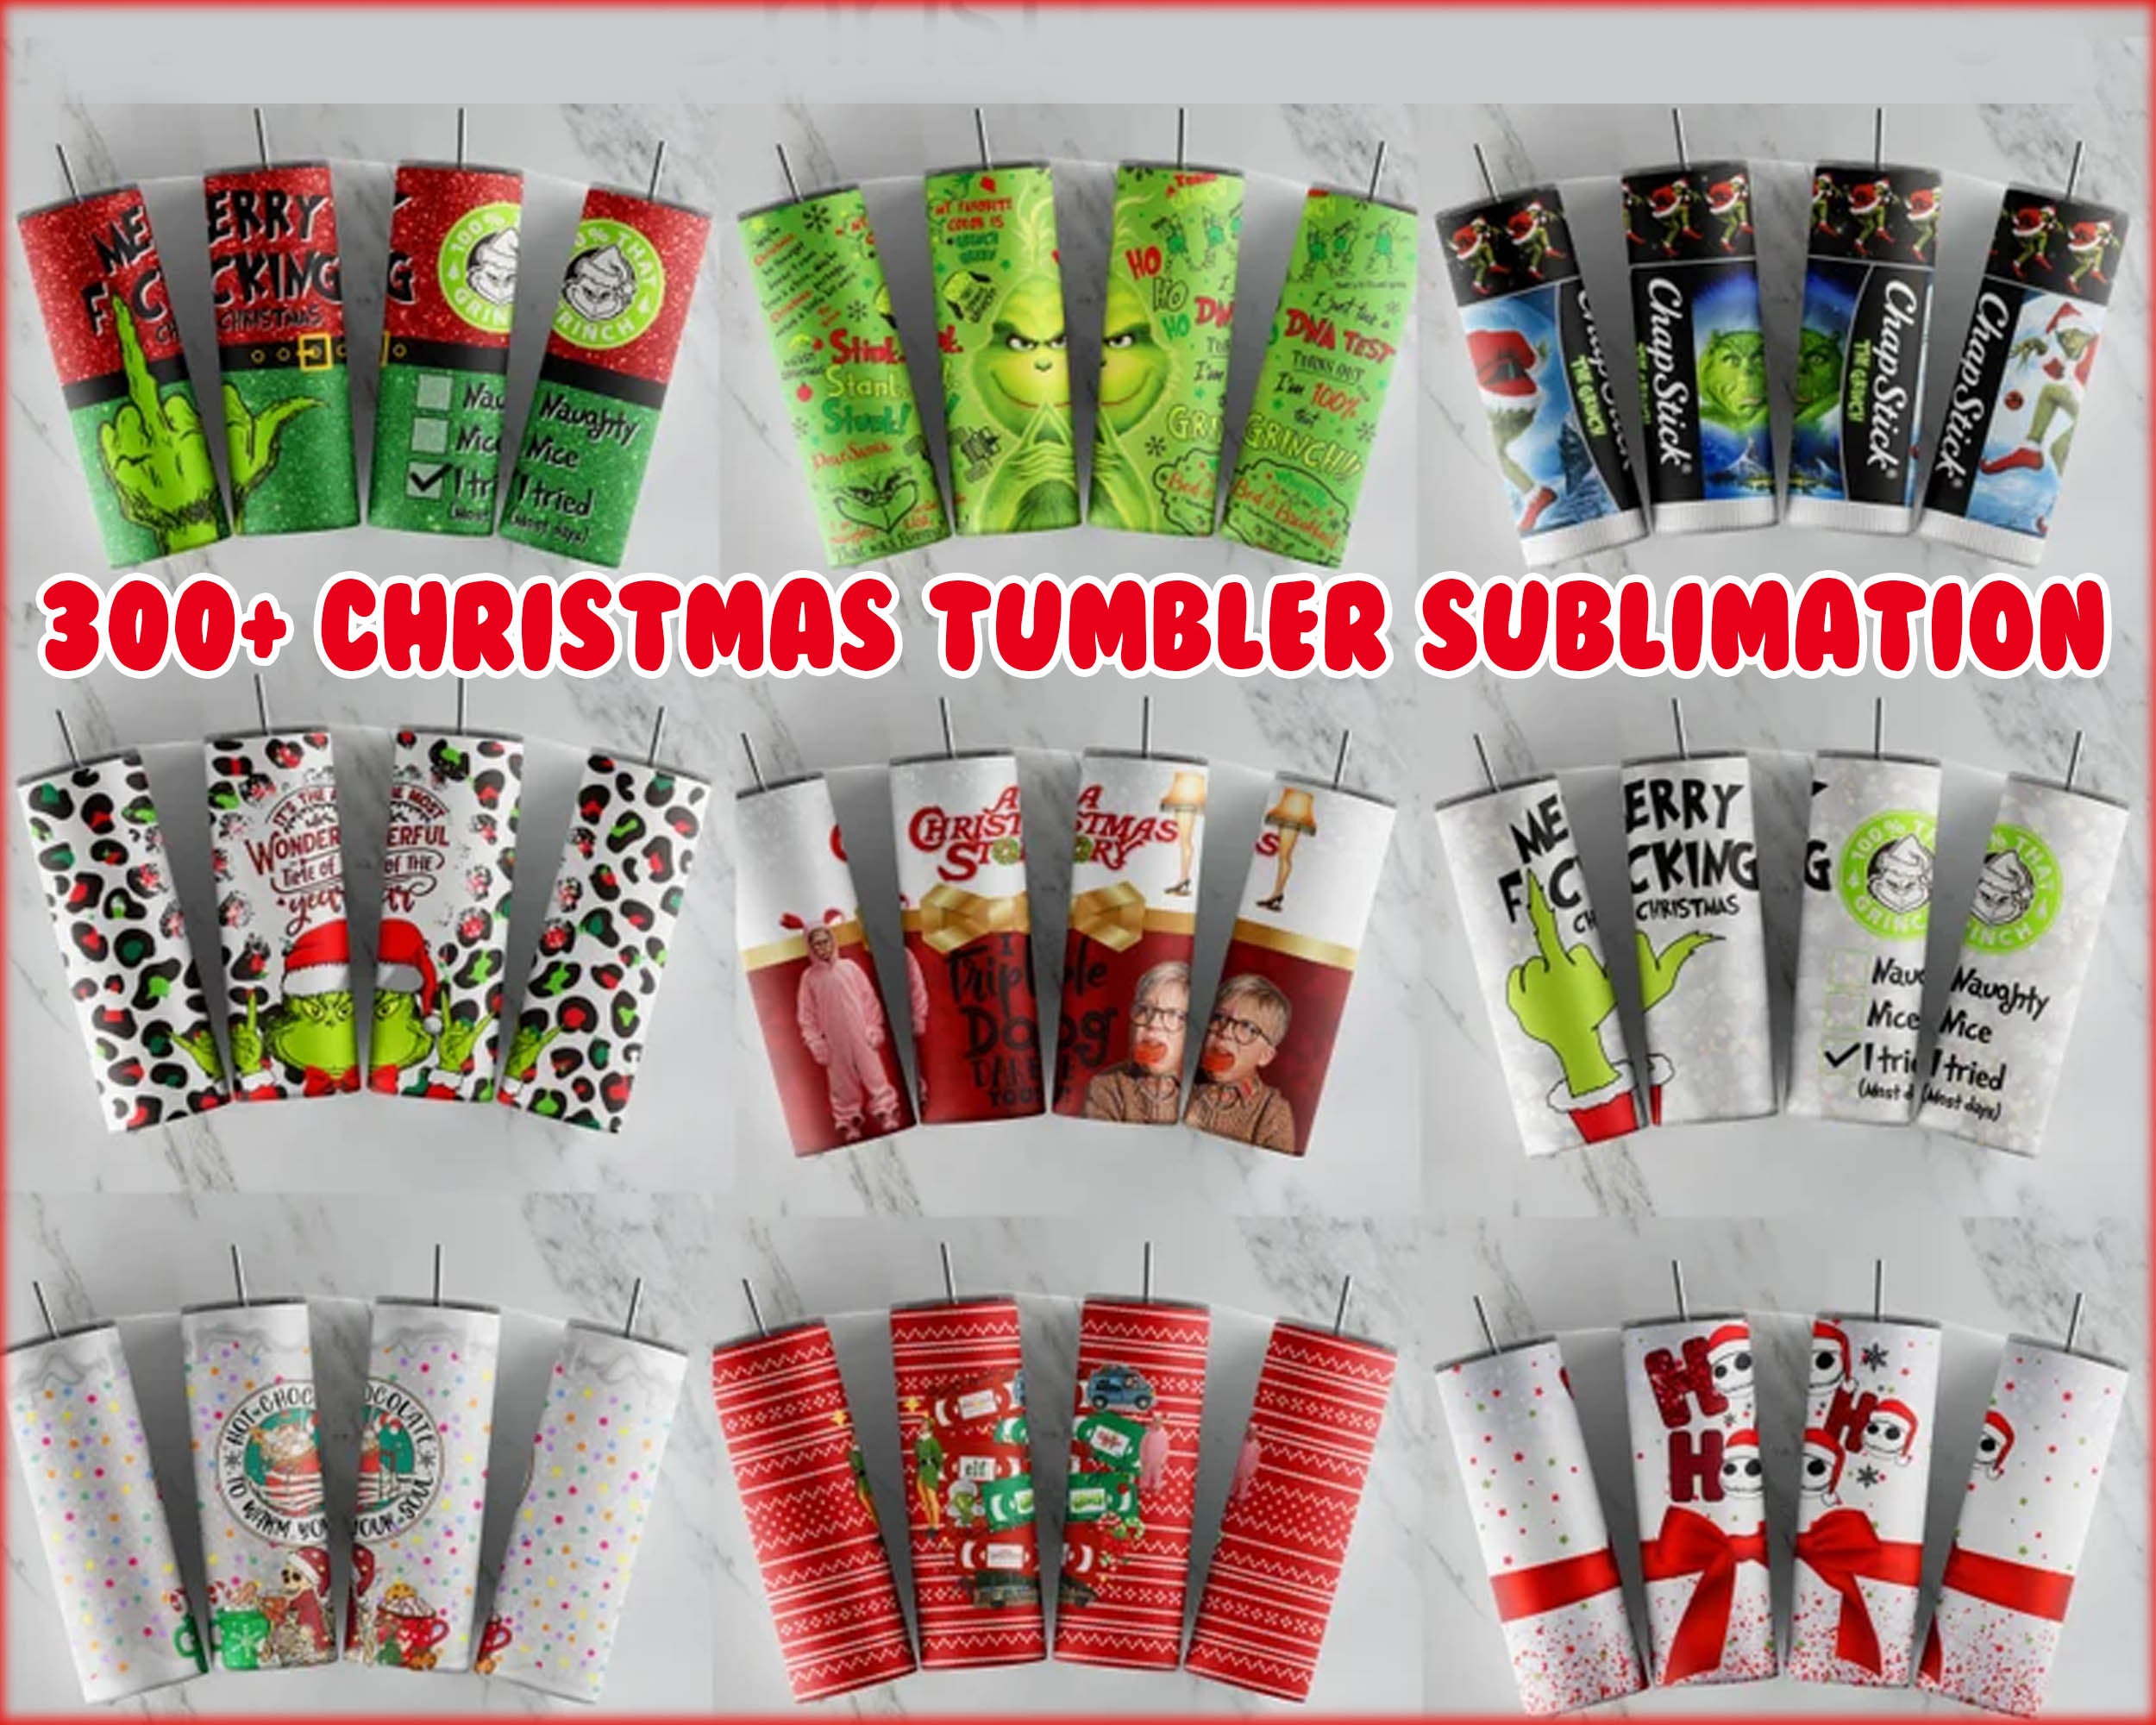 300+ Christmas Tumbler, 20oz Skinny Tumbler Sublimation Designs, Christmas Rules Tumbler Wrap for Straight Tumbler PNG Instant Download CRM10112204